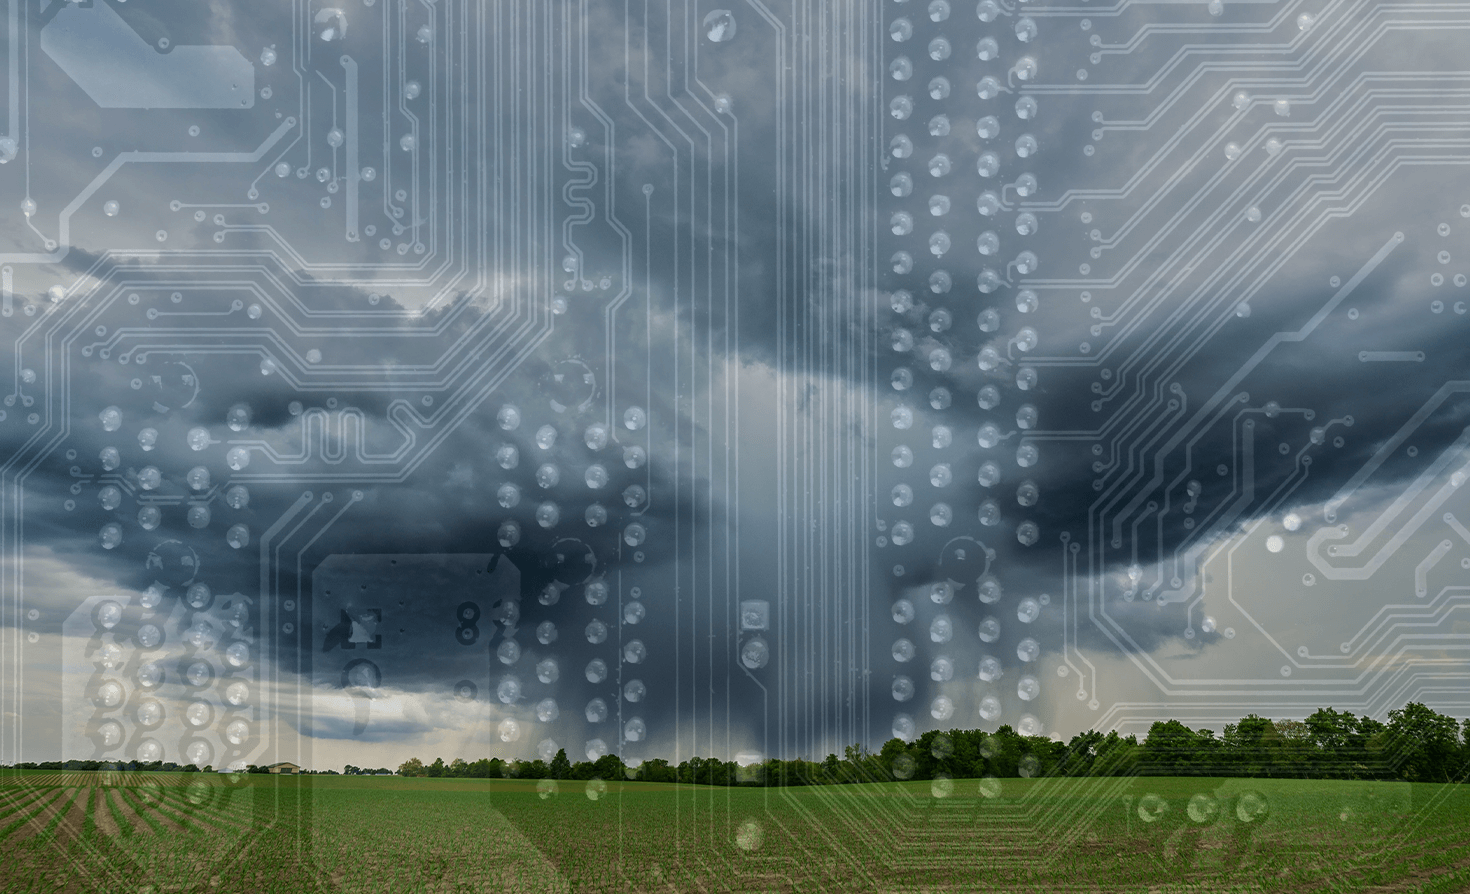 Software for accurate weather forecasting